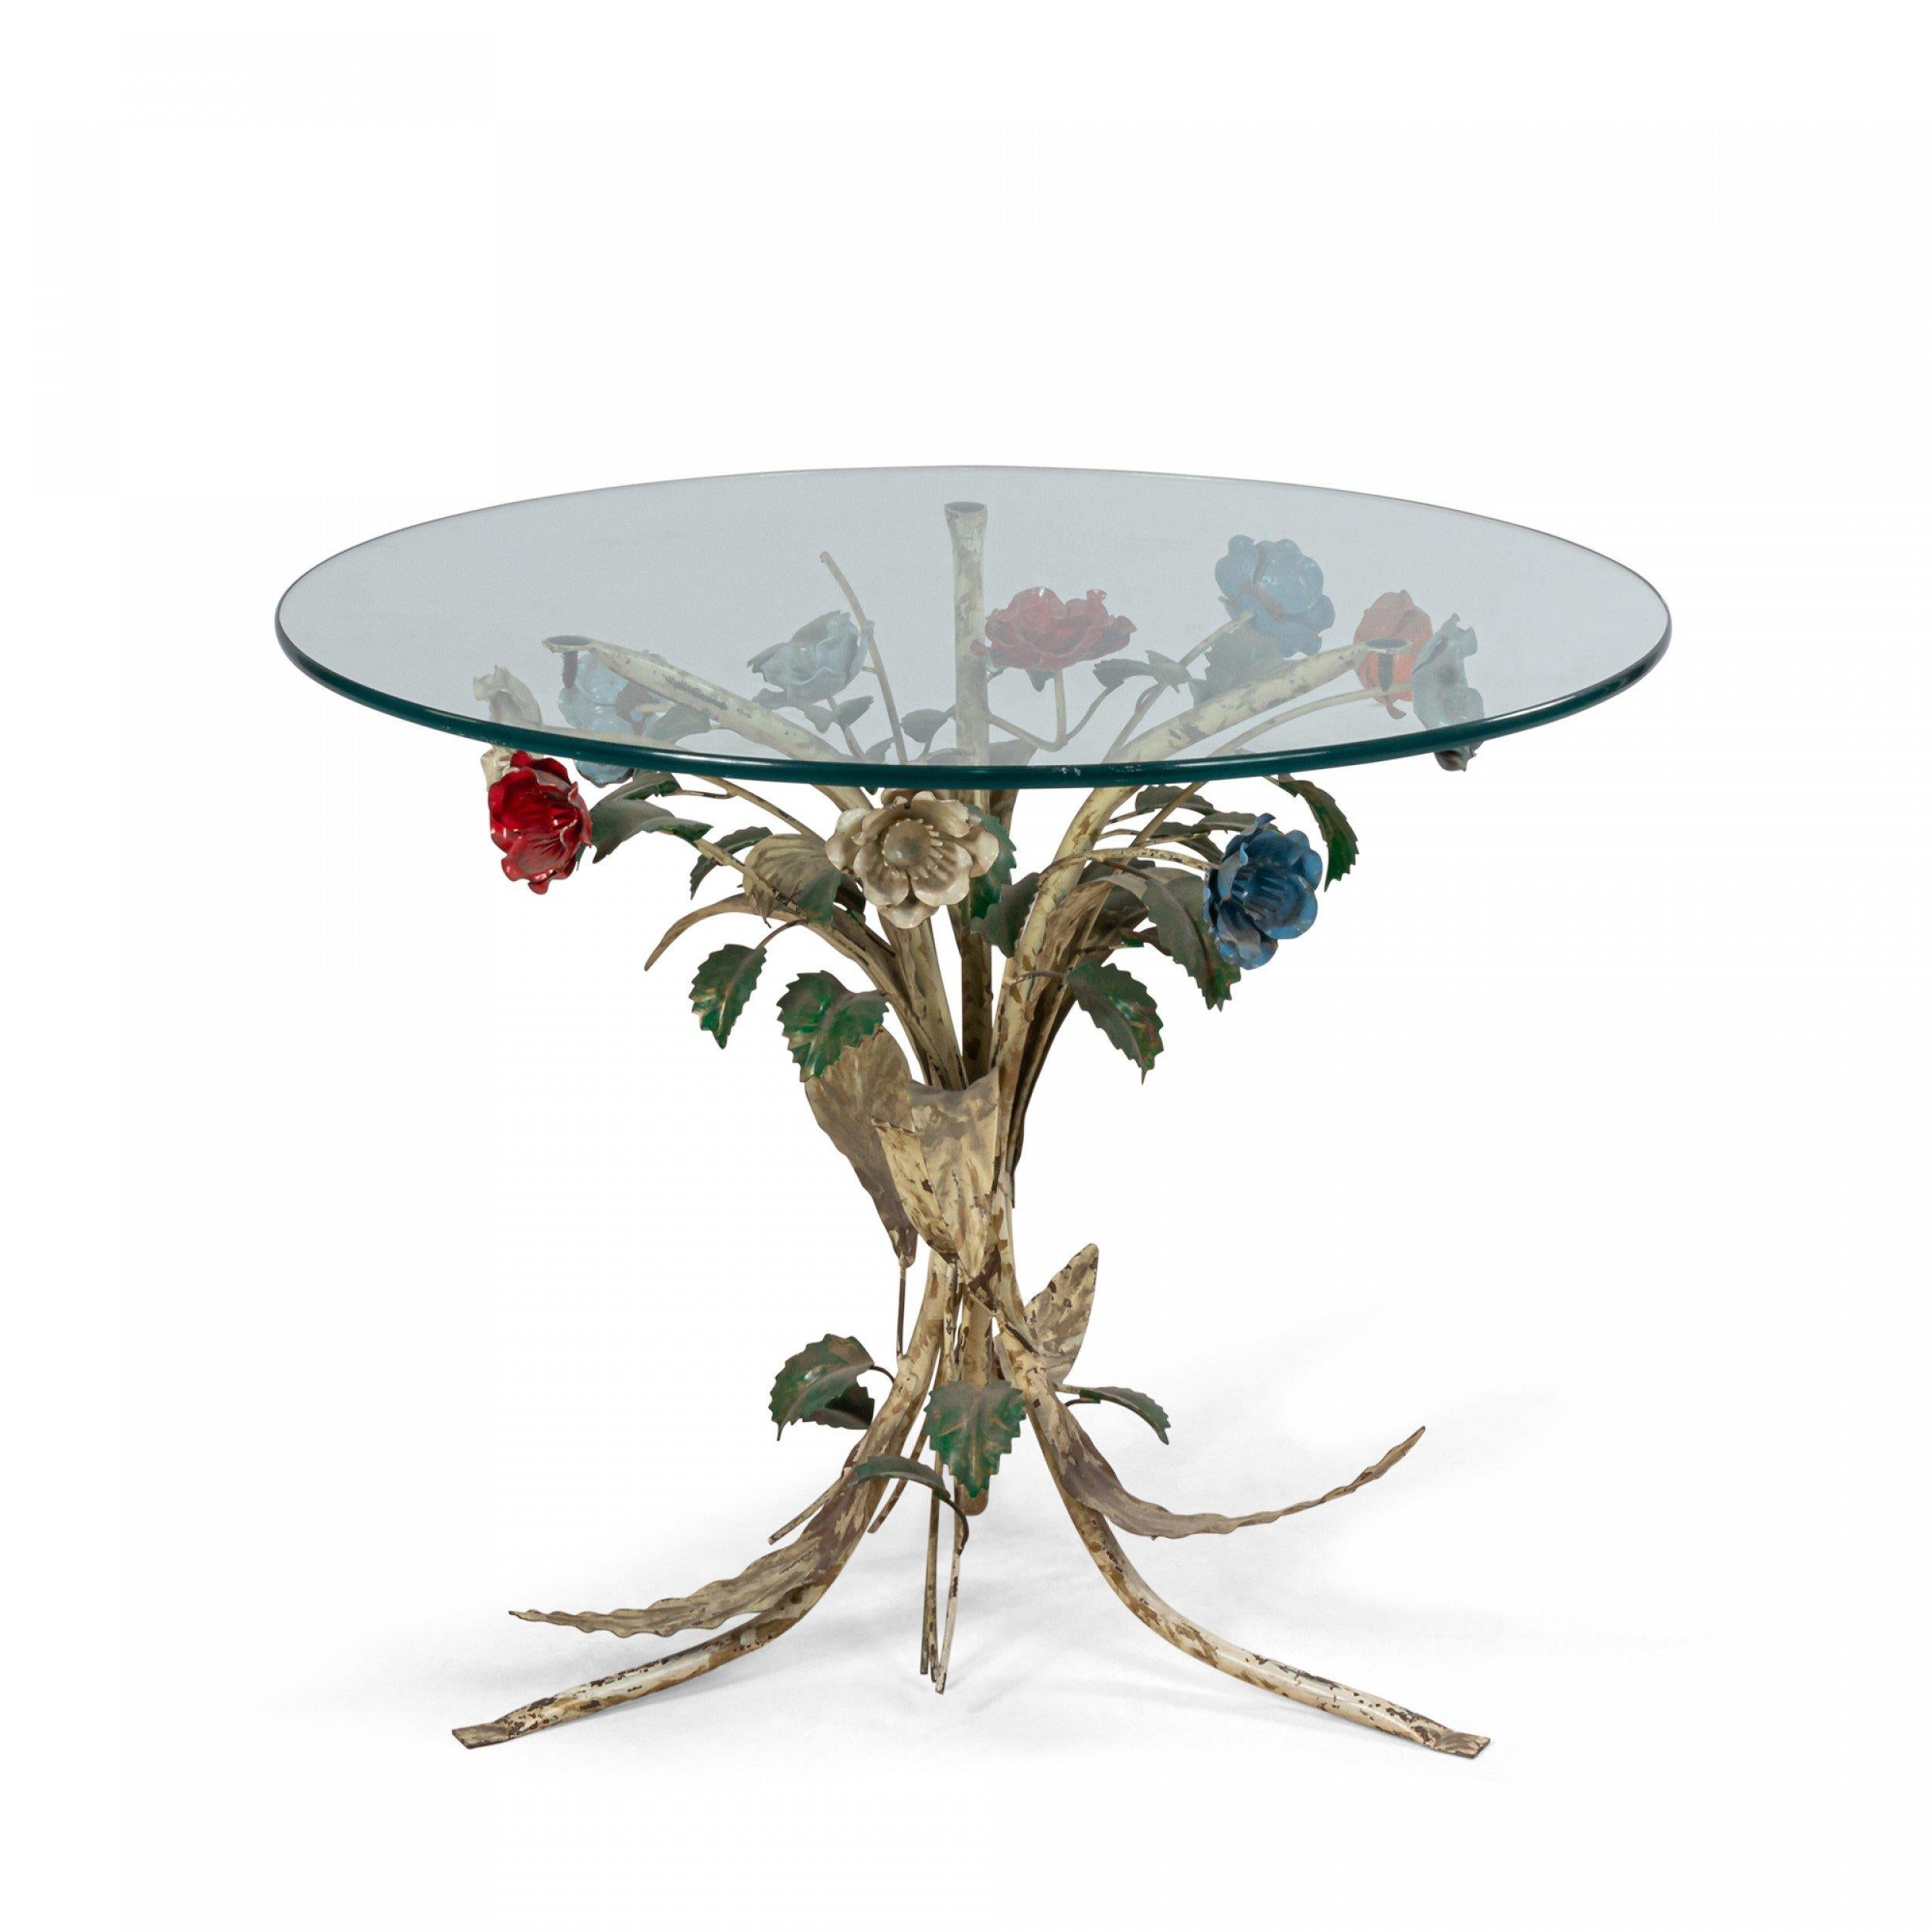 Midcentury coffee table with painted shaped metal floral base and circular glass top.